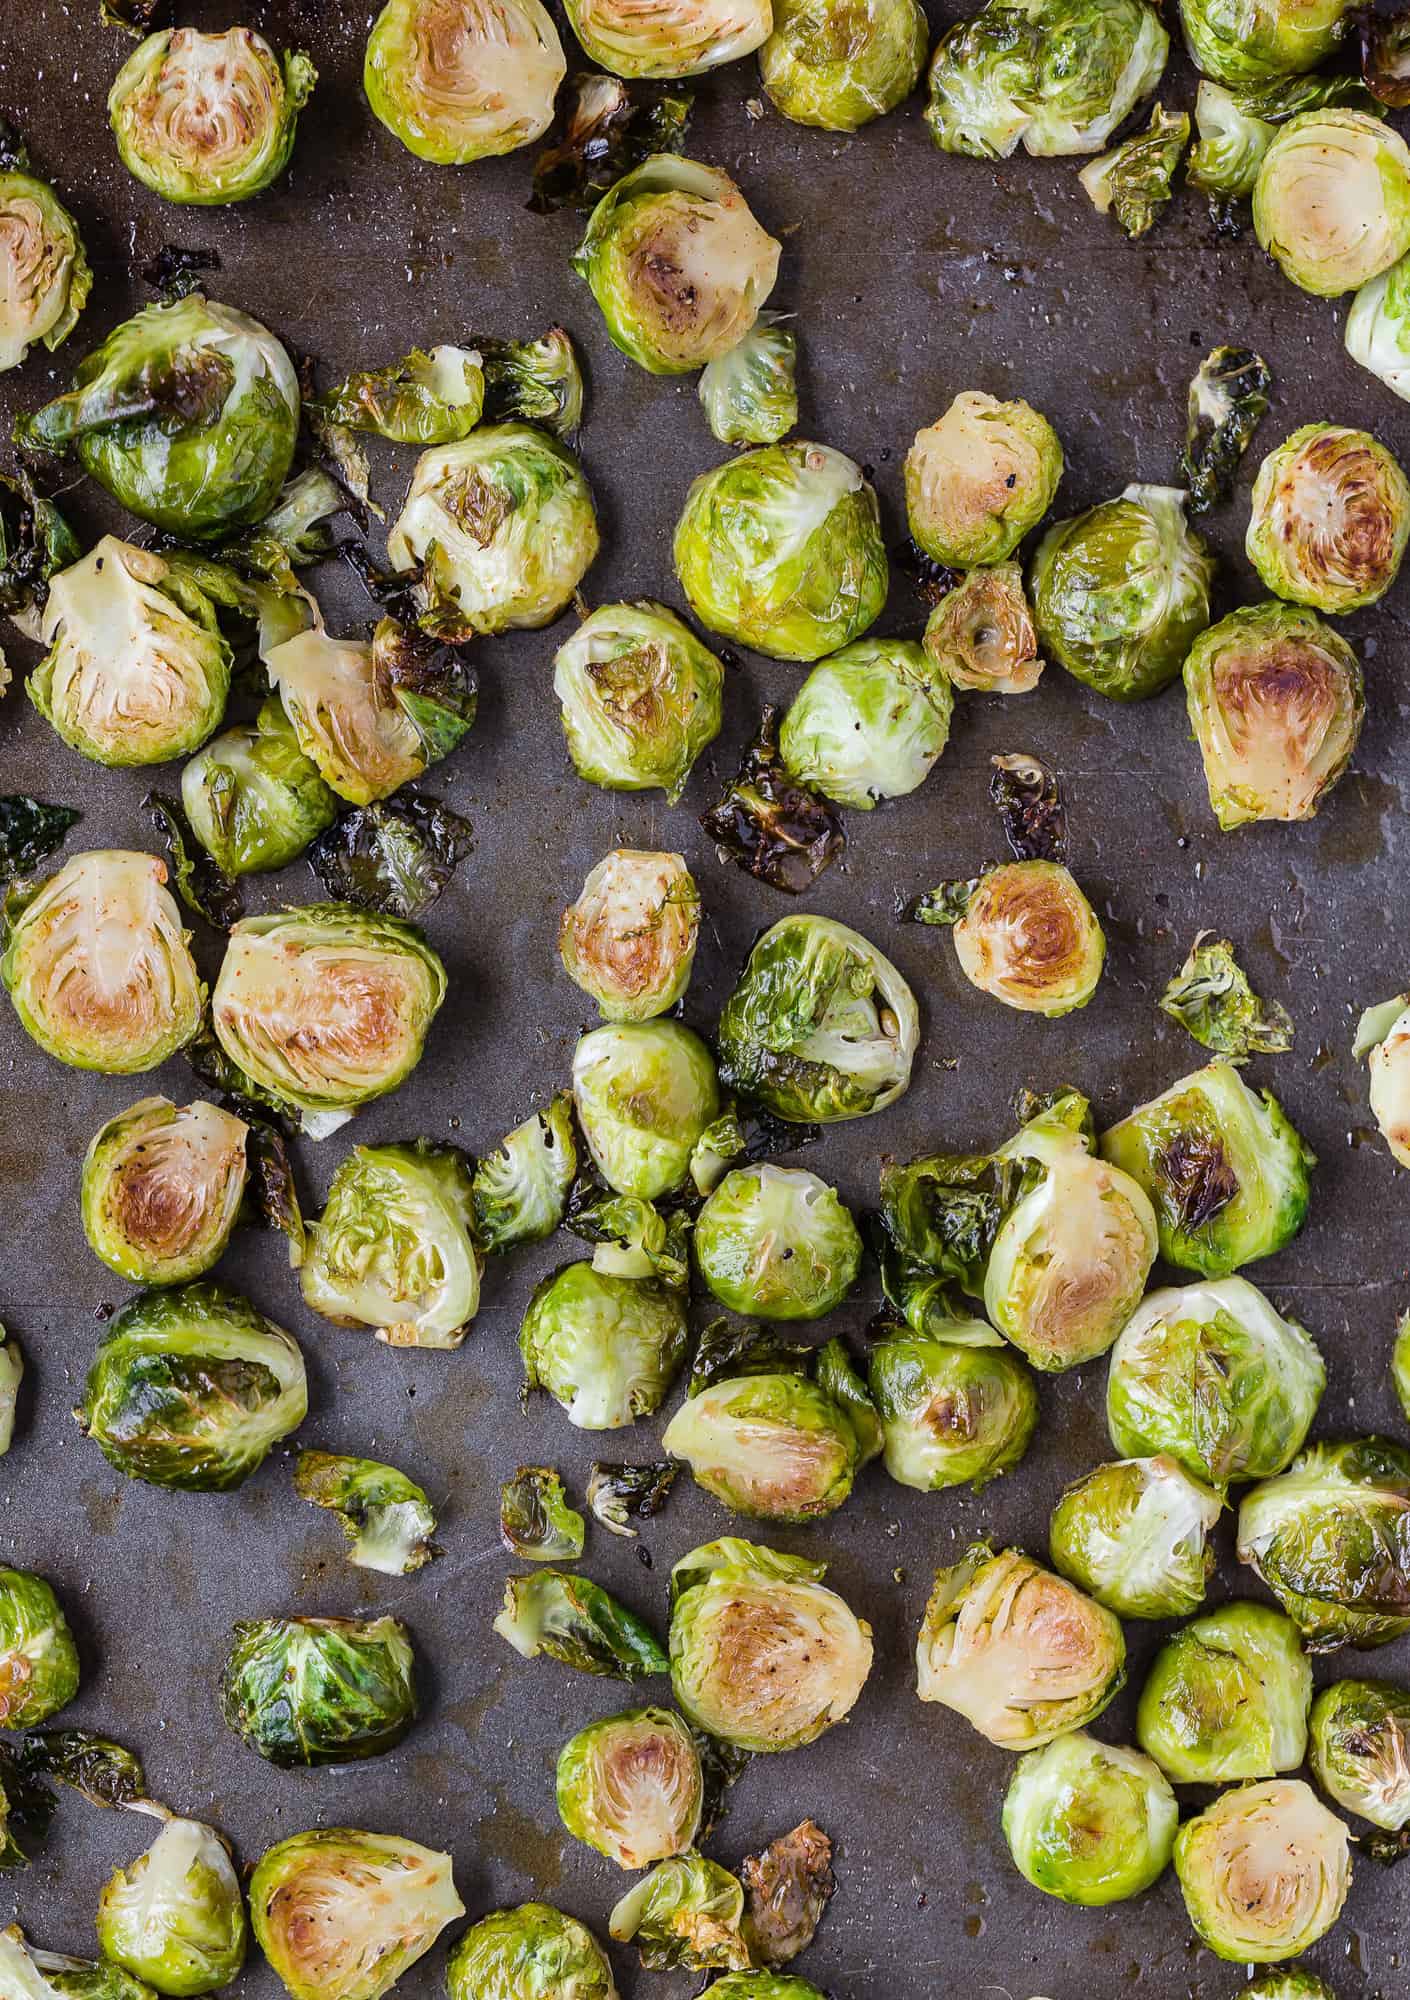 Roasted Brussels sprouts on sheet pan.